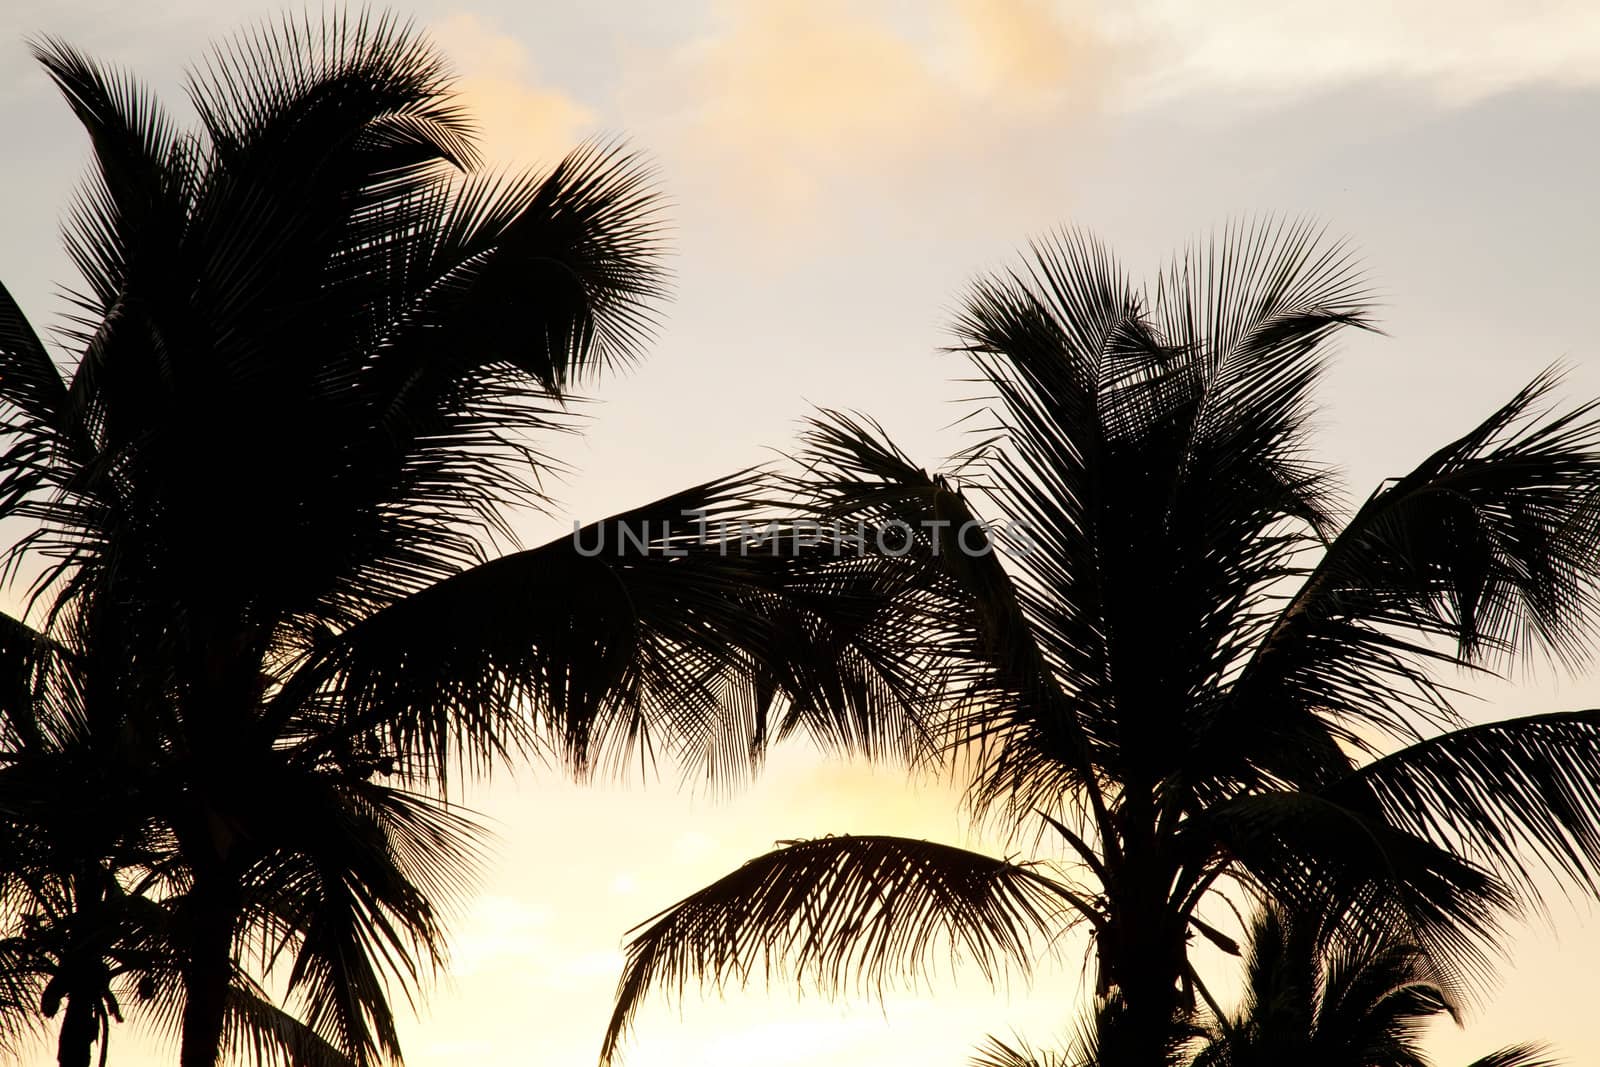 Palms and sunset by RawGroup